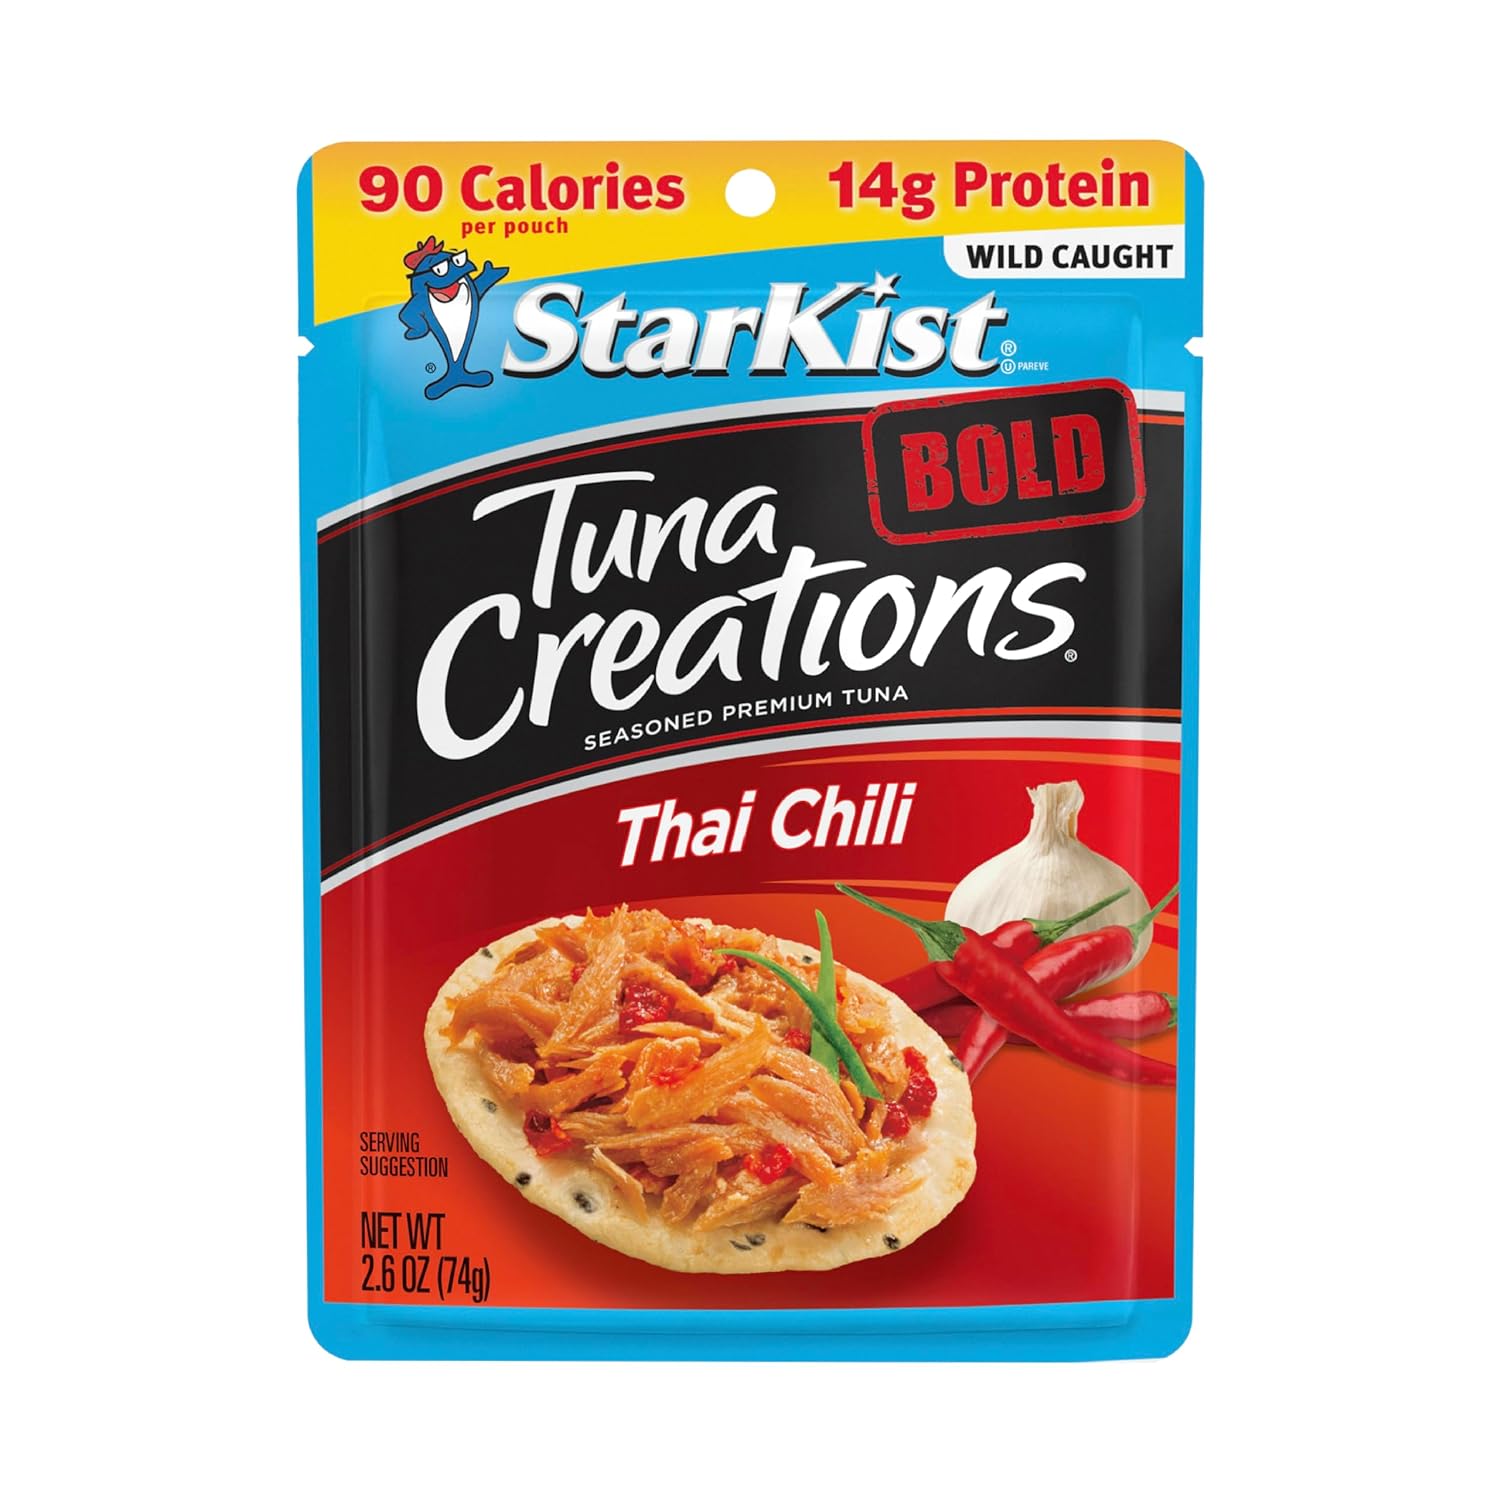 StarKist Tuna Creations Bold Thai Chili Style, Packaging May Vary, 2.6 Oz, Pack of 24